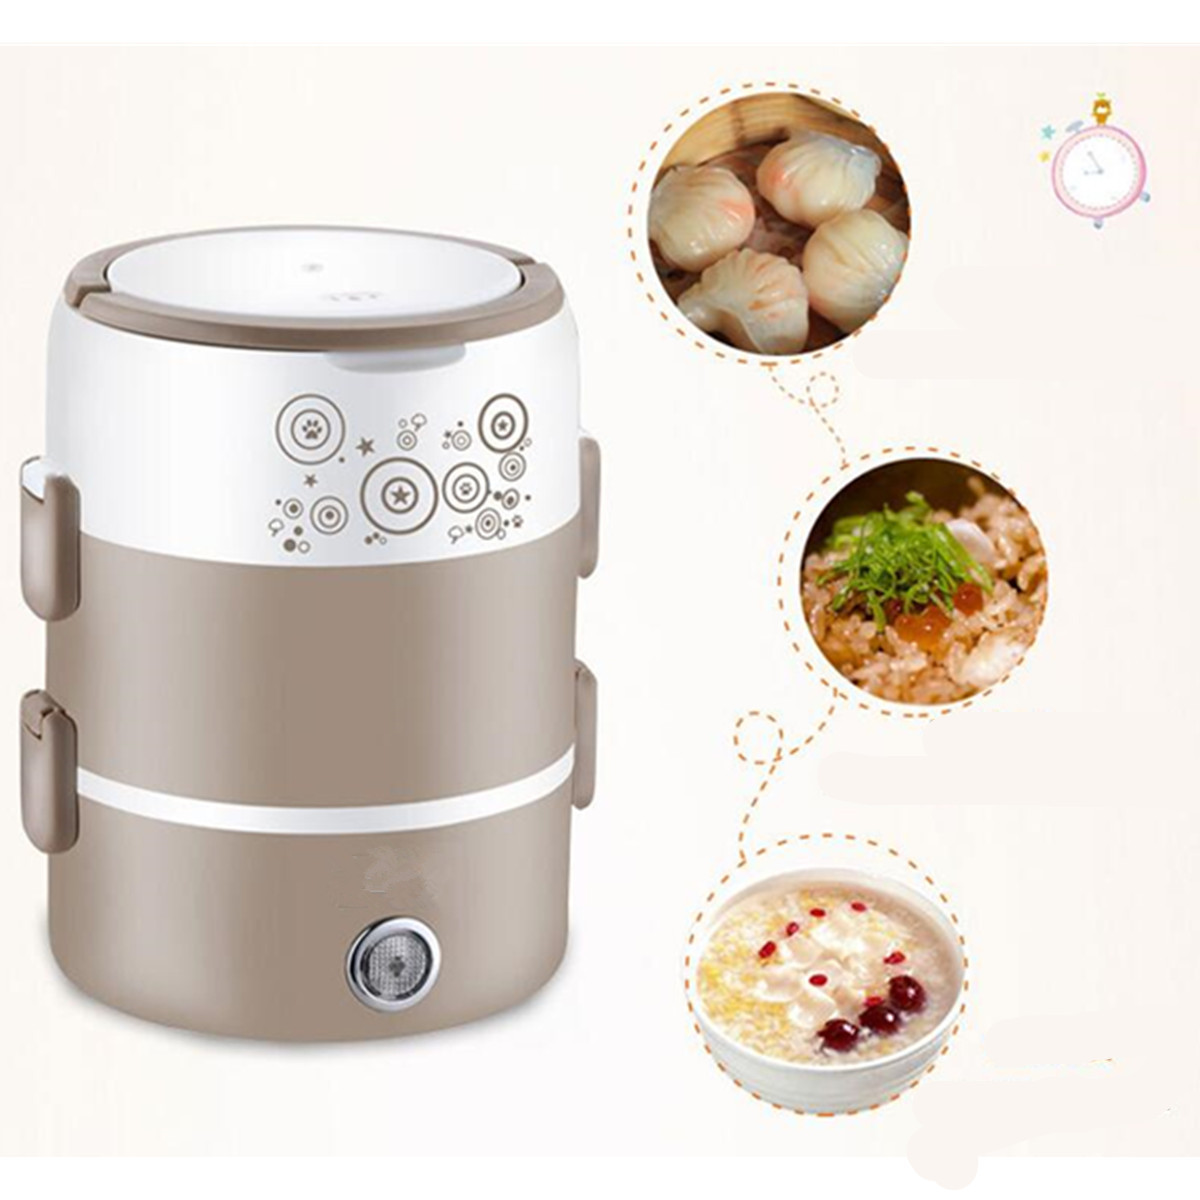 Mini Rice Cooker Stainless Steel 2L Insulated Lunch Box Food Container Sealed Fresh Bento Box Self-Heating For School Office